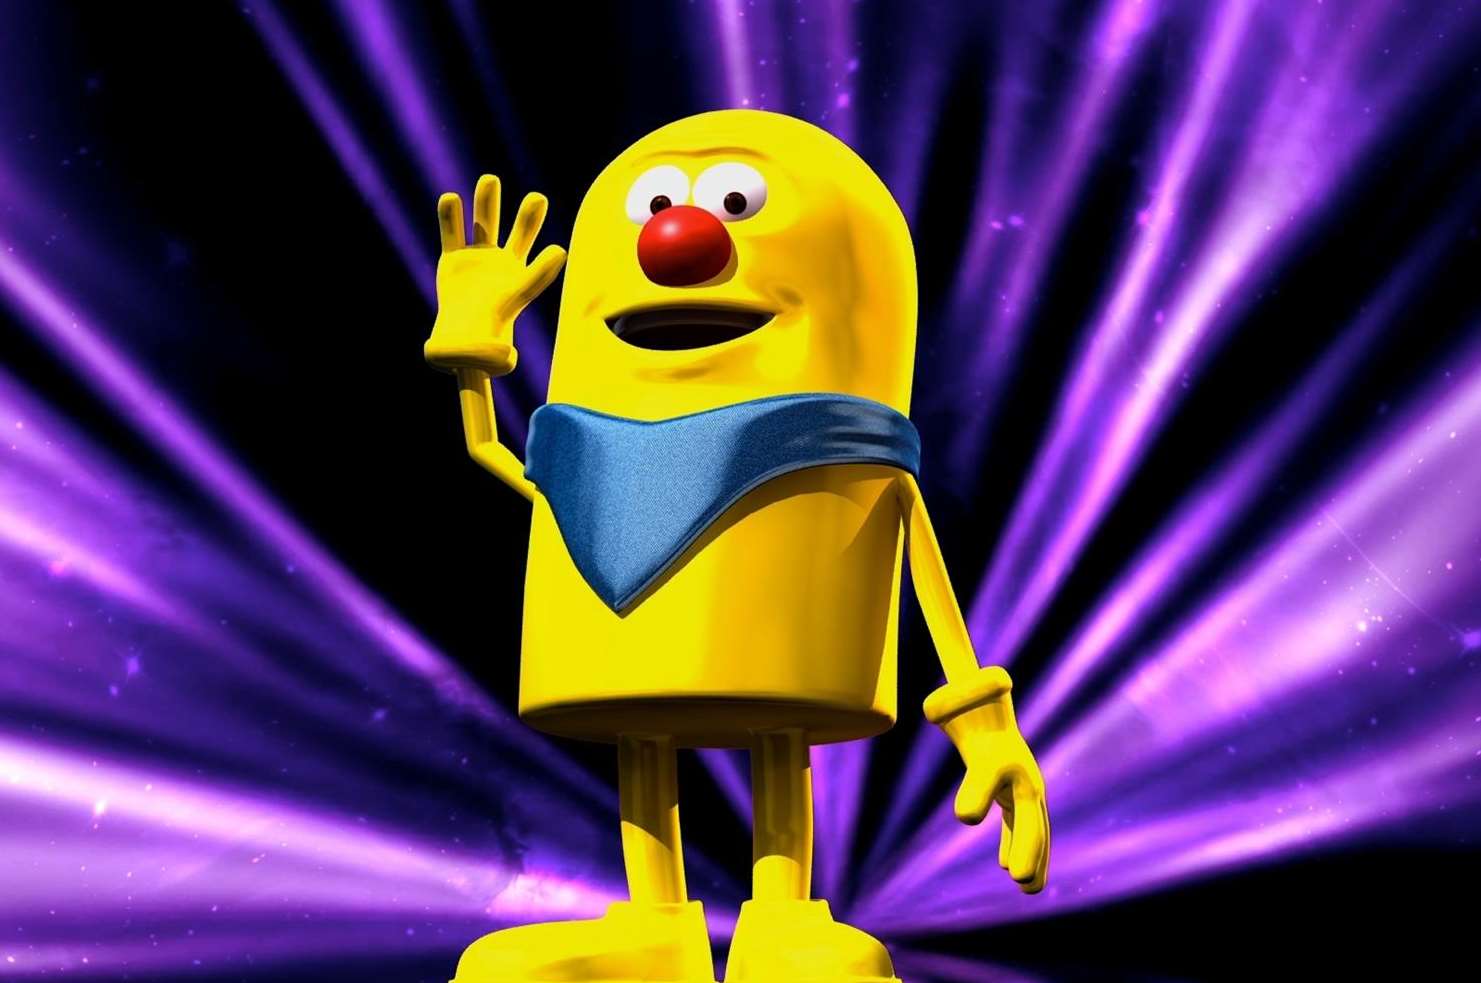 Mr Chips, the show's mascot